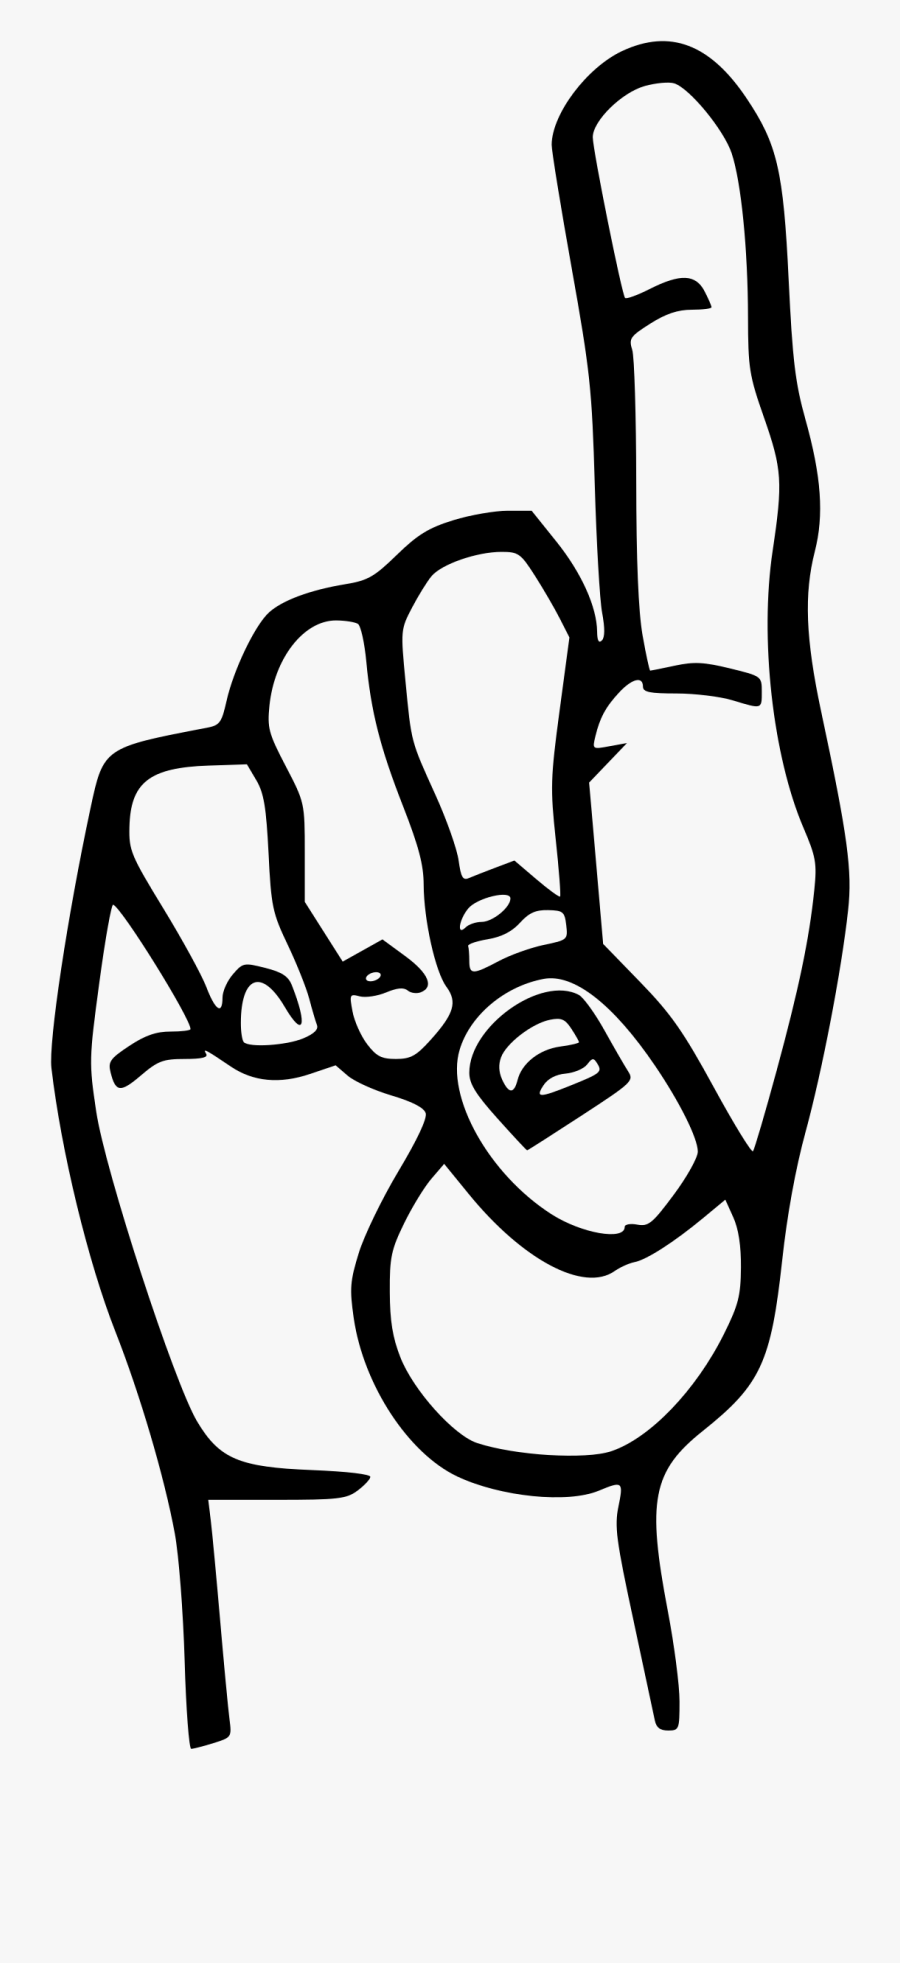 Draw Ad In Sign Language, Transparent Clipart